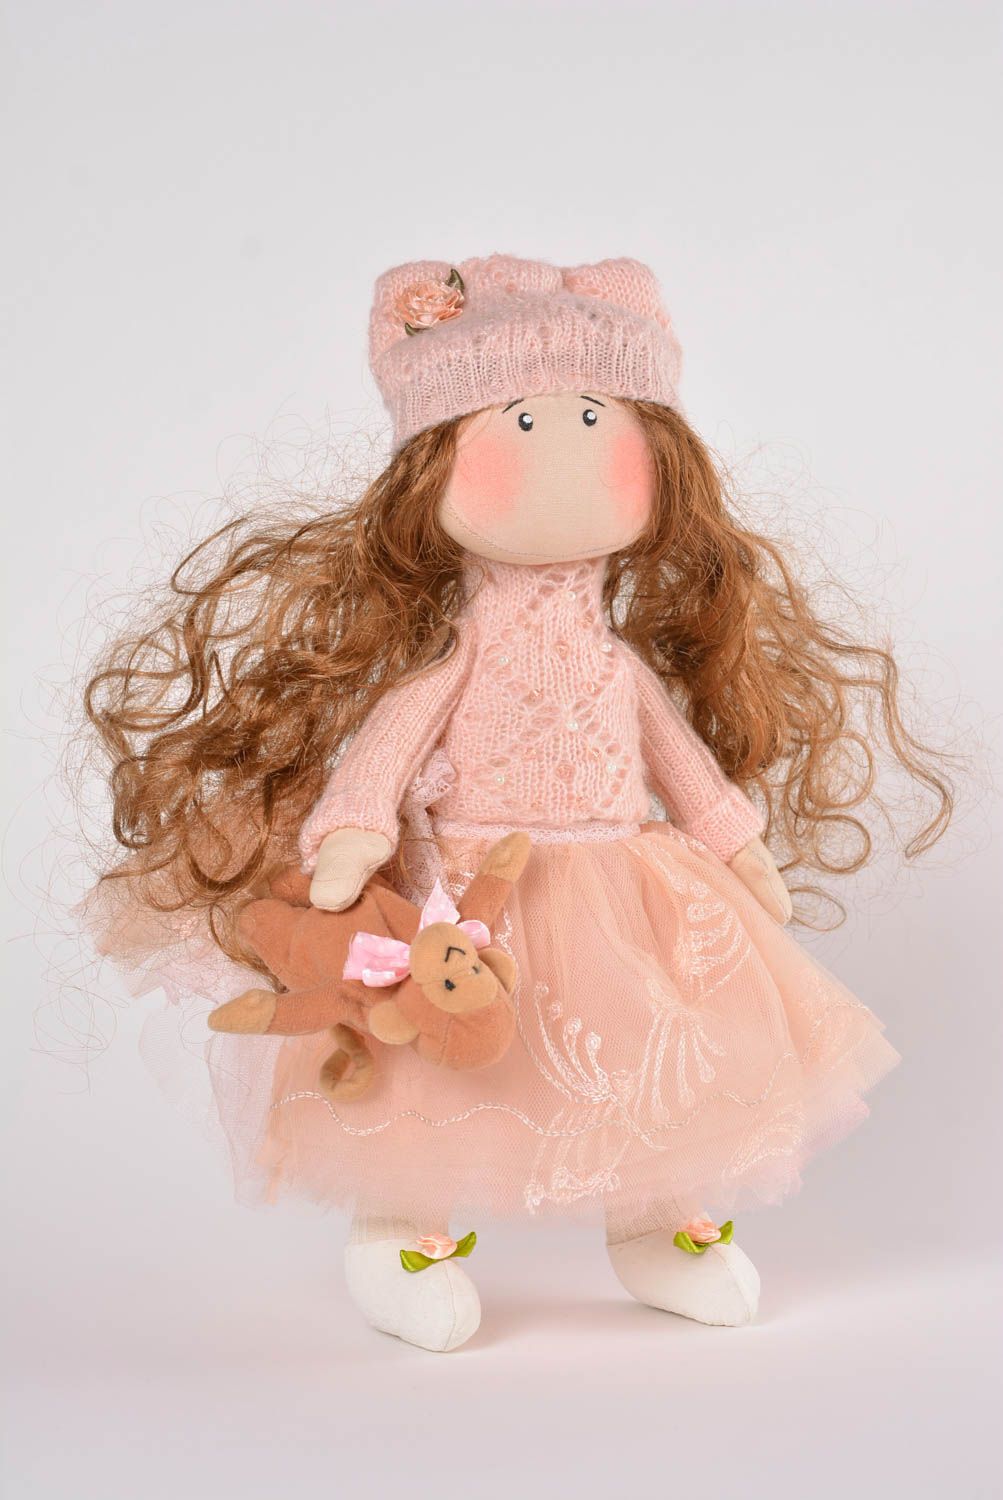 Beautiful handmade rag doll best toys for kids stuffed soft toy home design photo 1